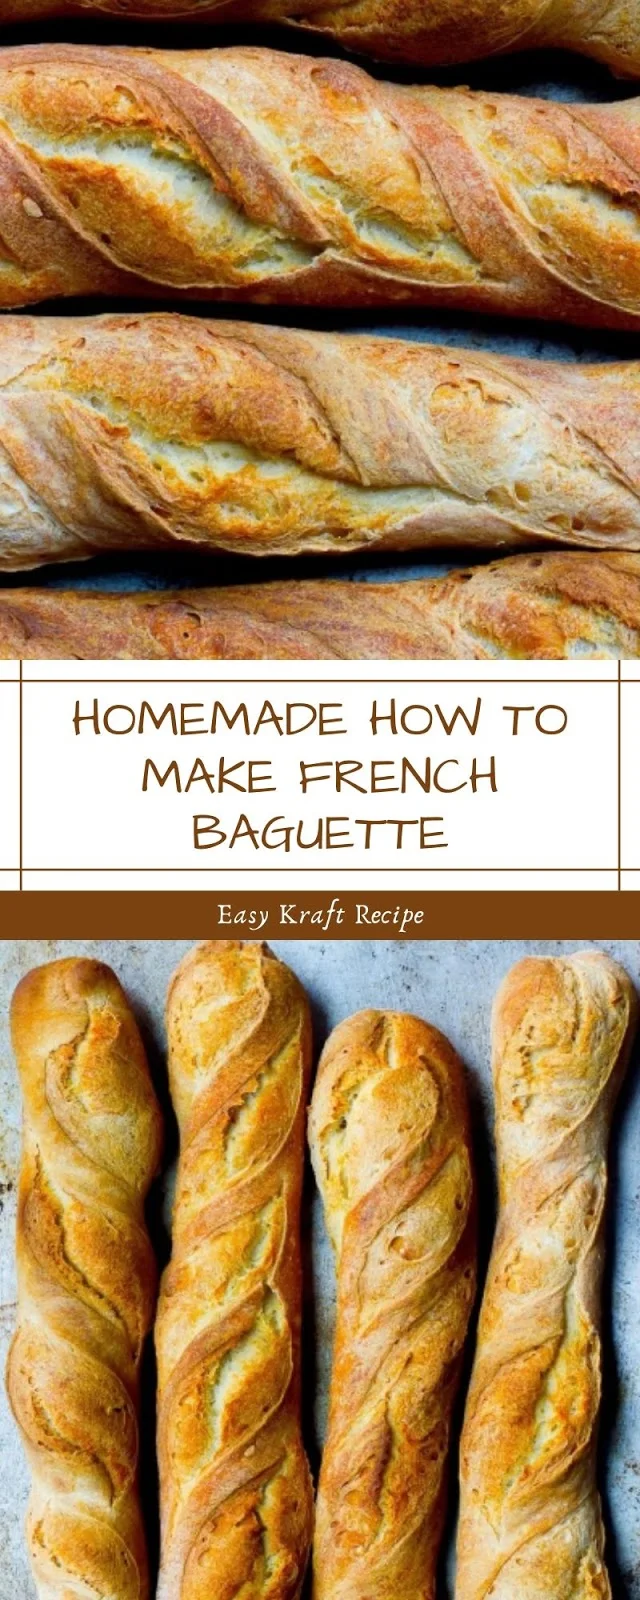 HOMEMADE HOW TO MAKE FRENCH BAGUETTE